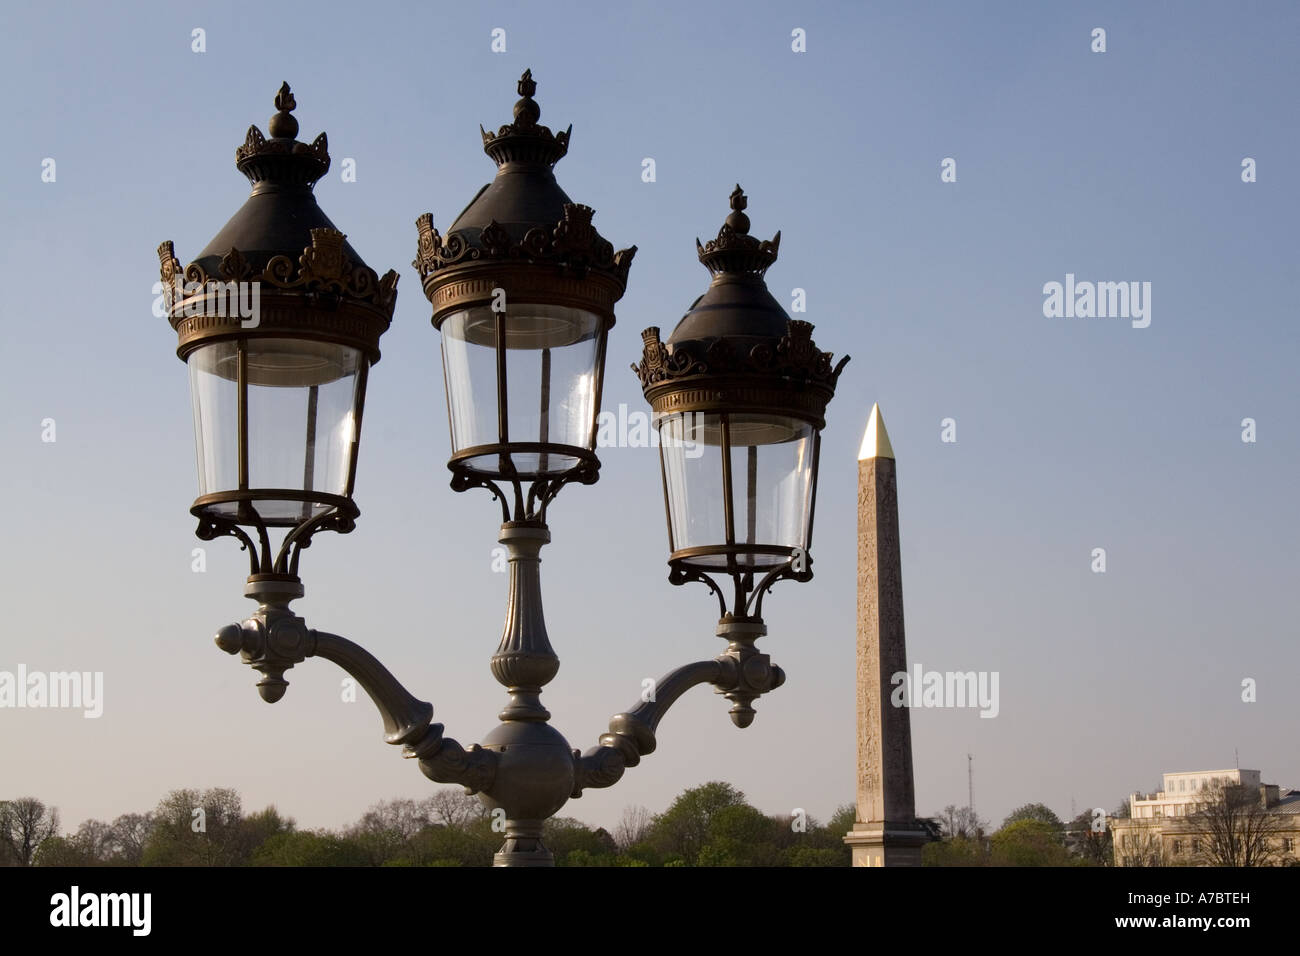 Page 2 - Tuileries Gardens Concorde High Resolution Stock Photography and  Images - Alamy